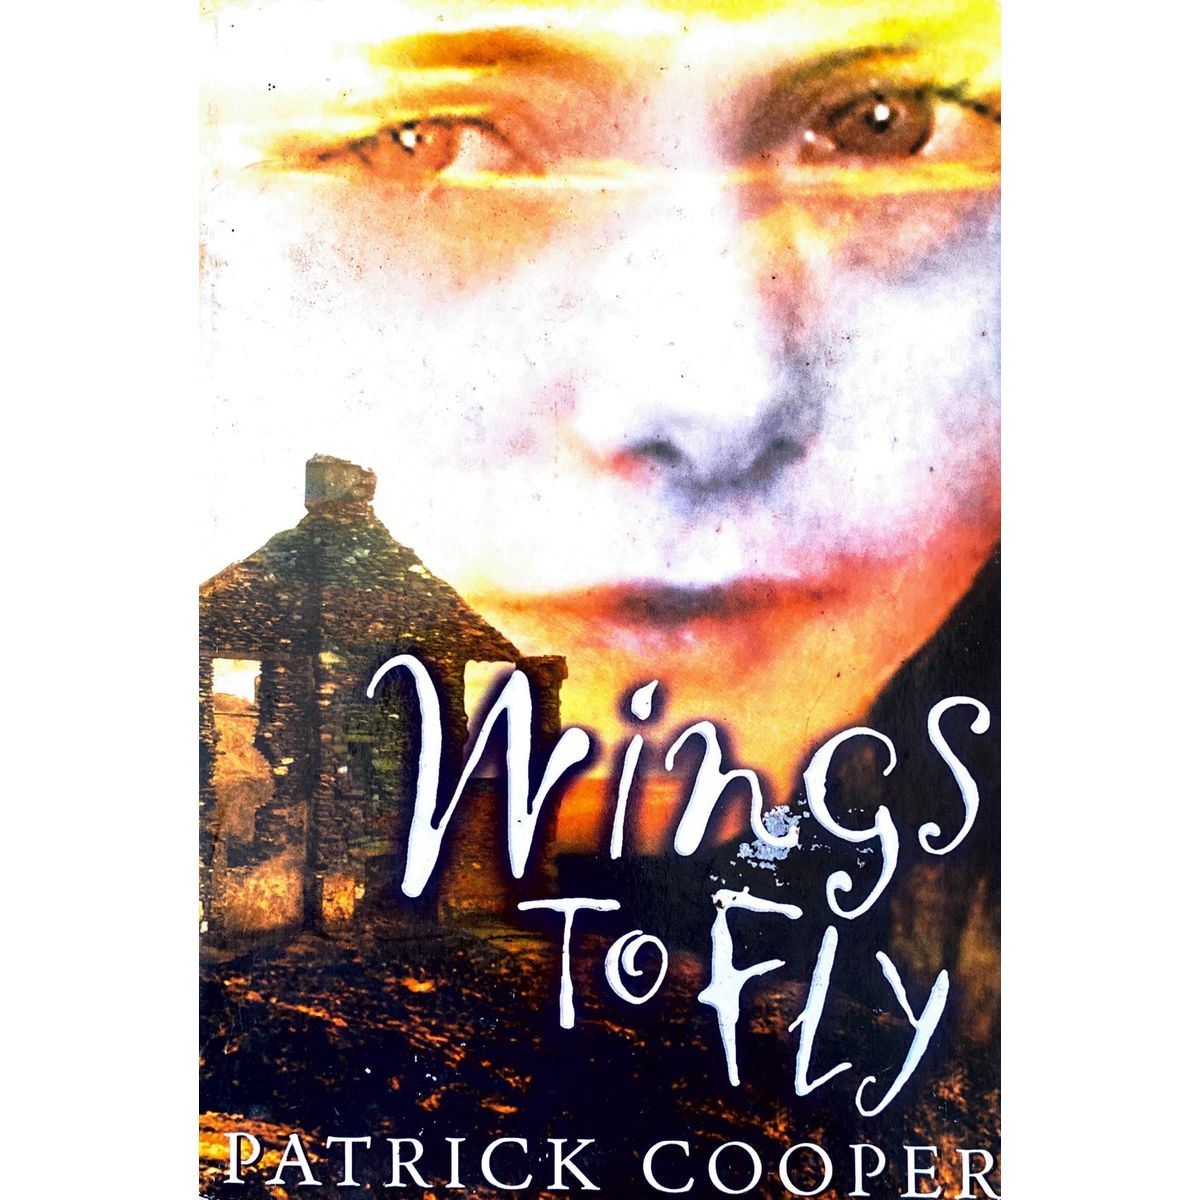 ISBN: 9781842700266 / 184270026X - Wings To Fly by Patrick Cooper, Signed [2001]